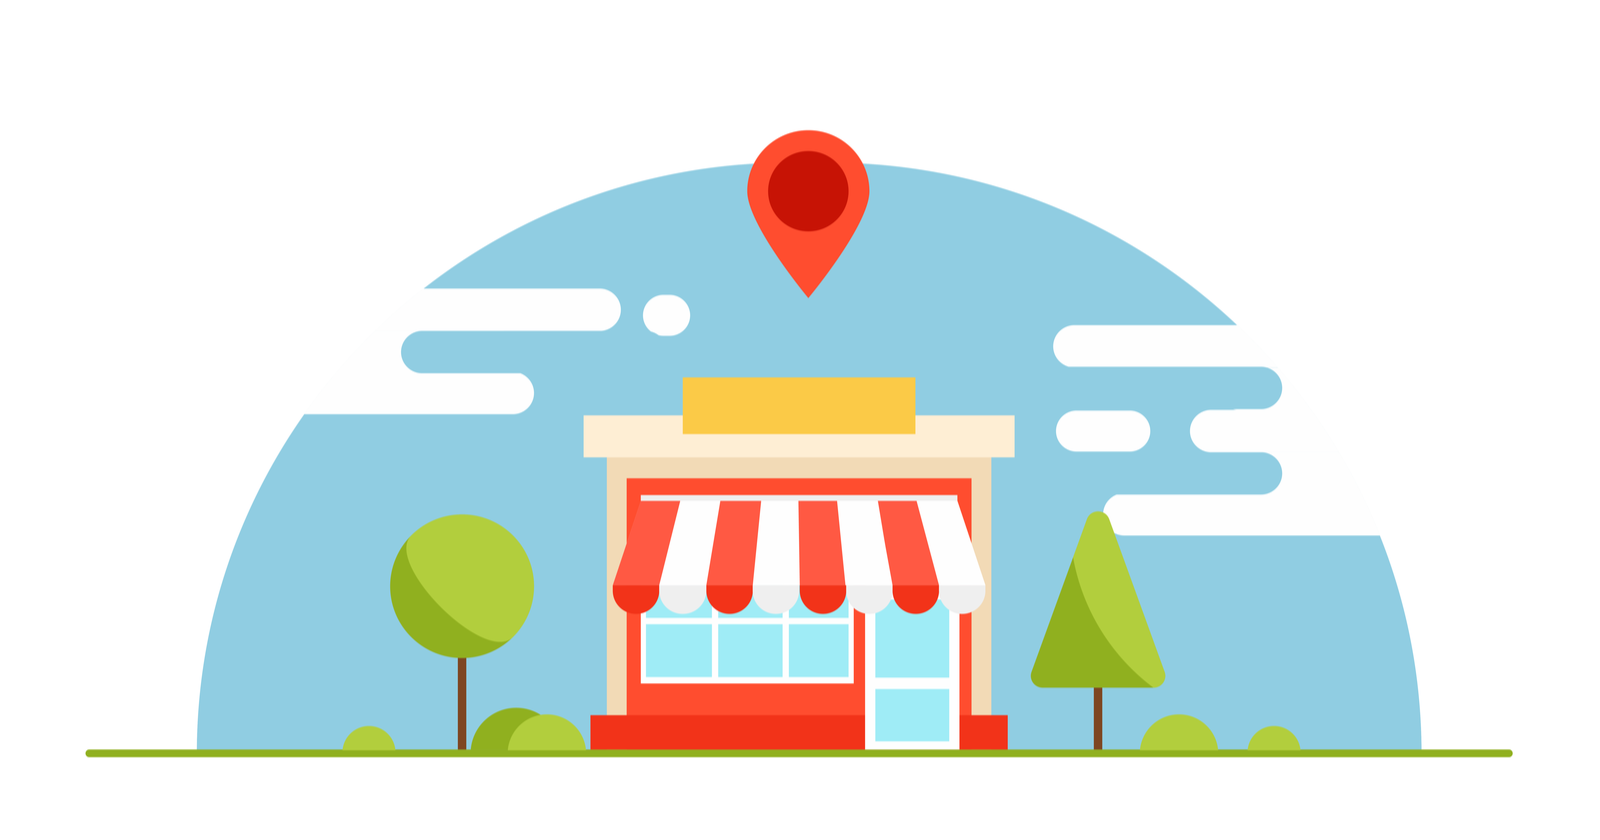 7 Local SEO Updates From 2021 That Will Impact Your Planning